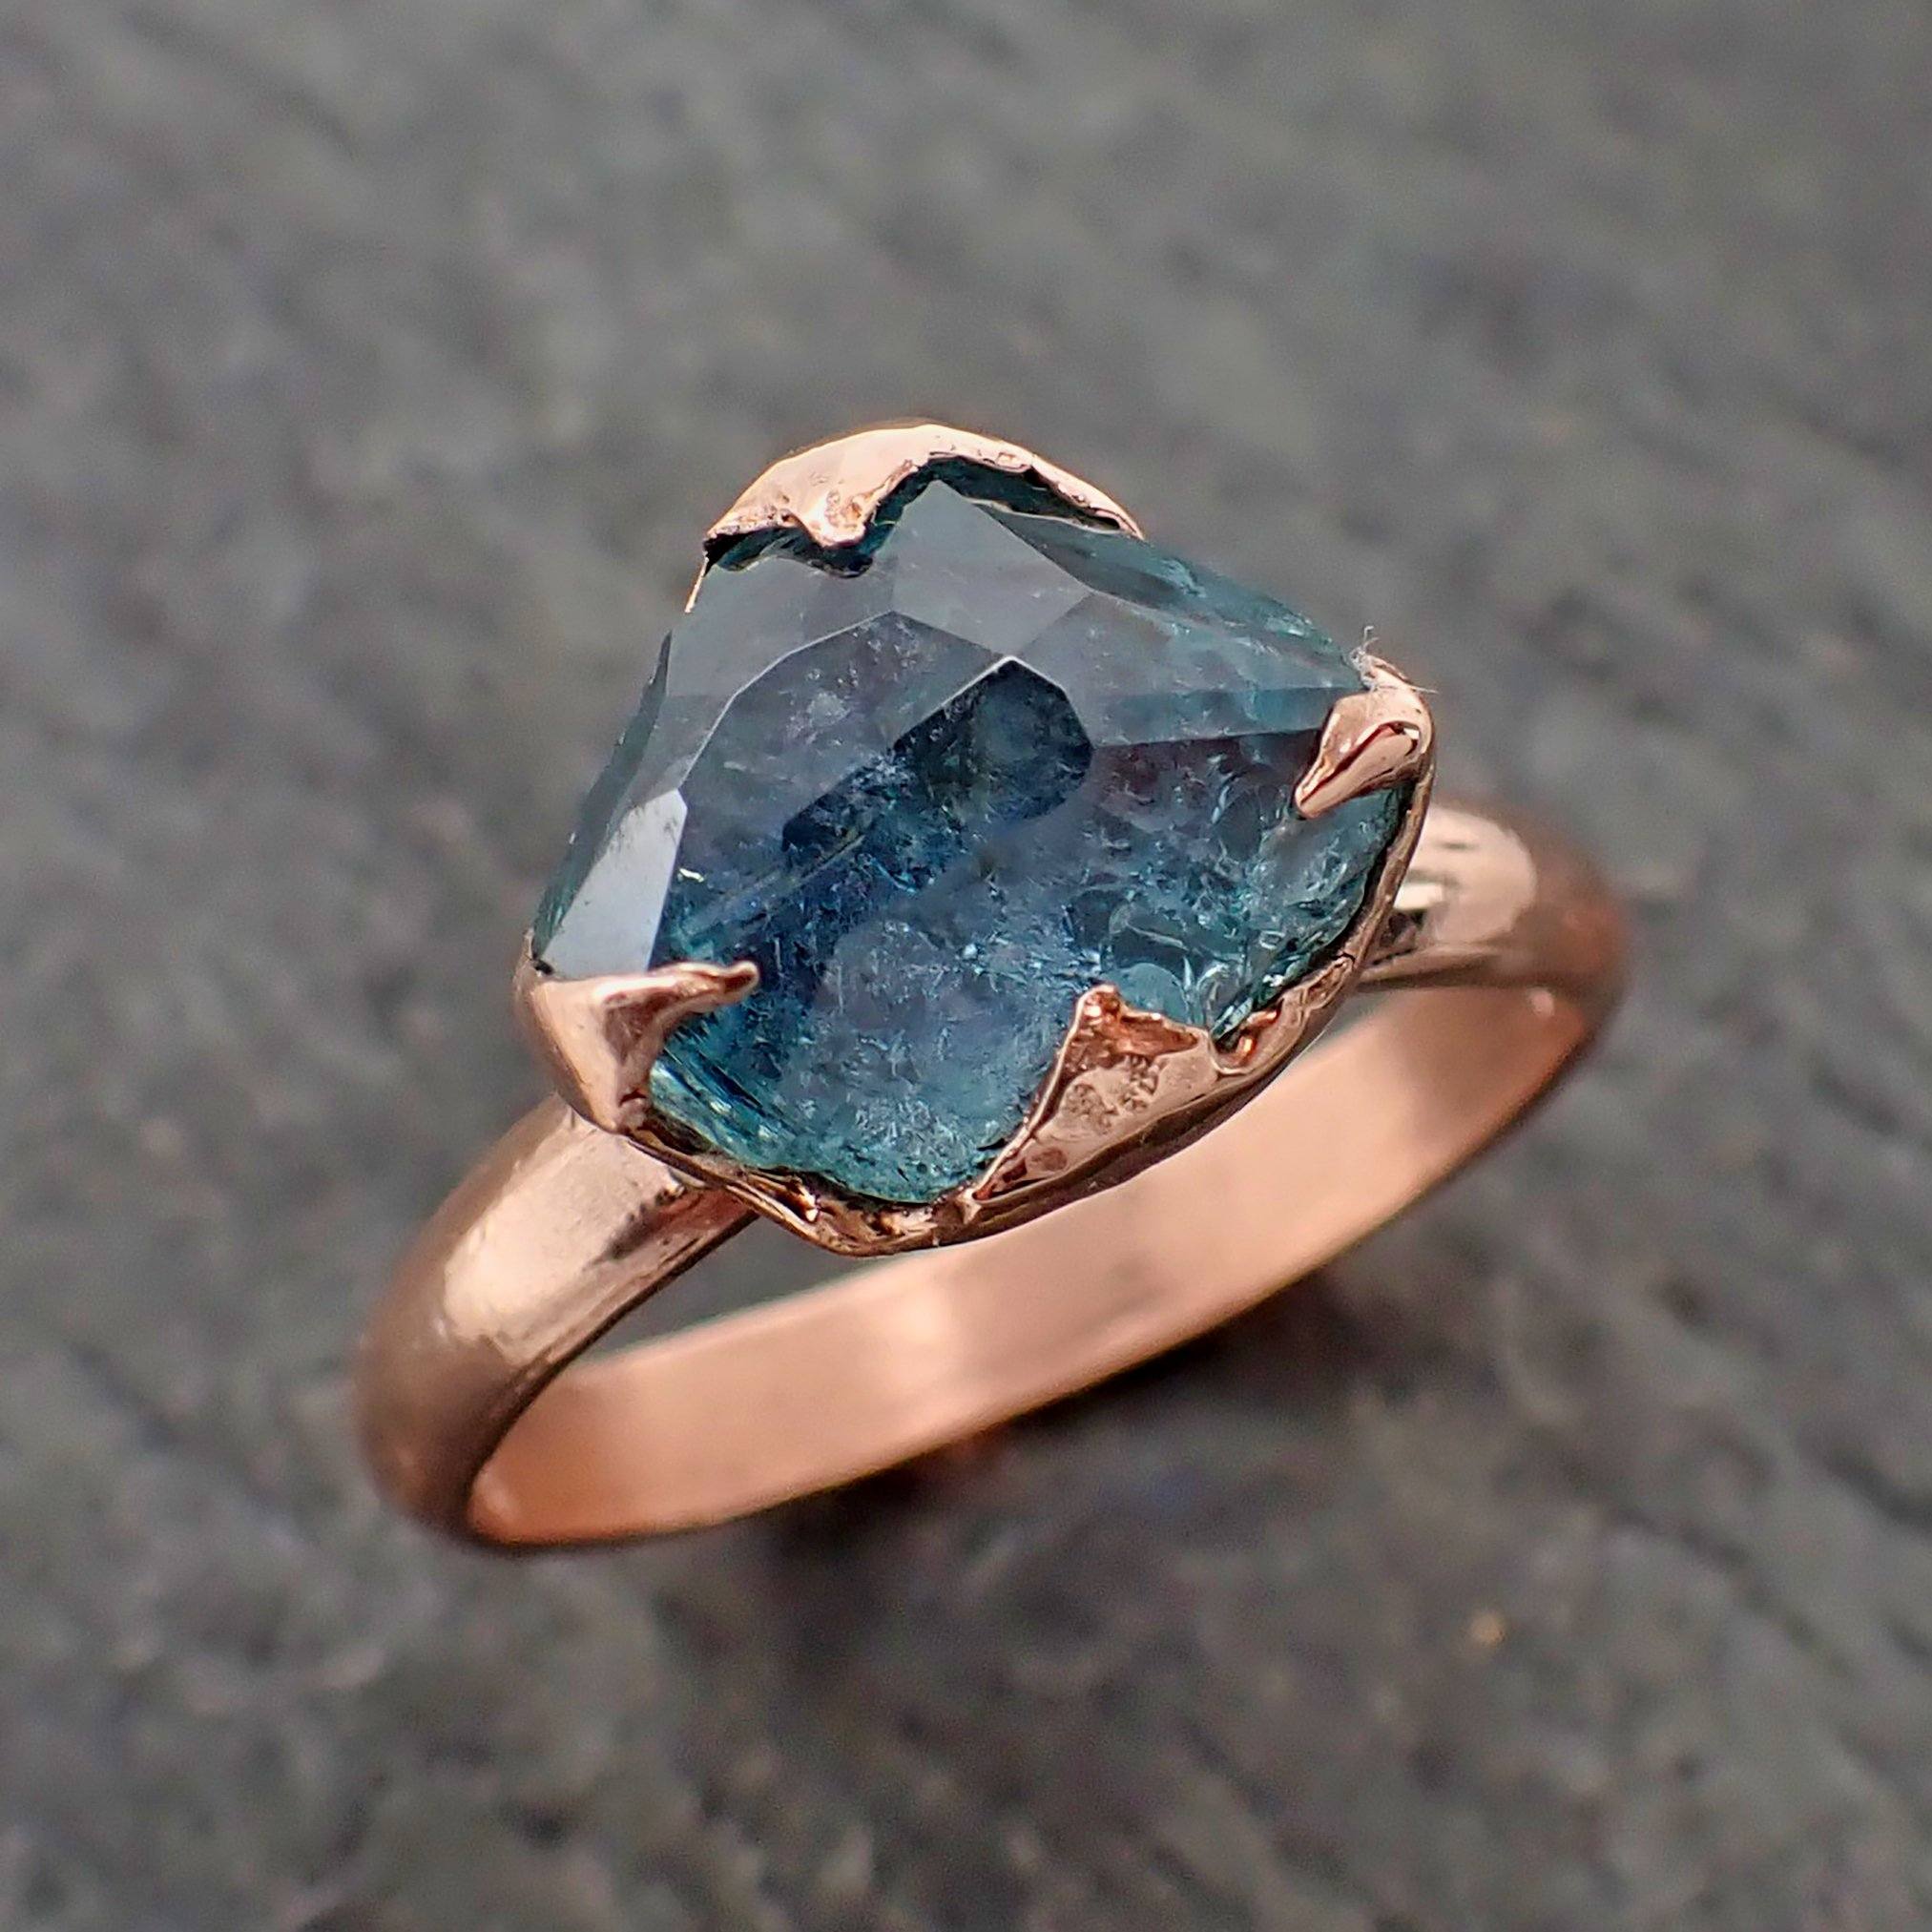 partially faceted blue sapphire solitaire 14k rose gold engagement ring wedding ring custom one of a kind blue gemstone ring 2190 Alternative Engagement